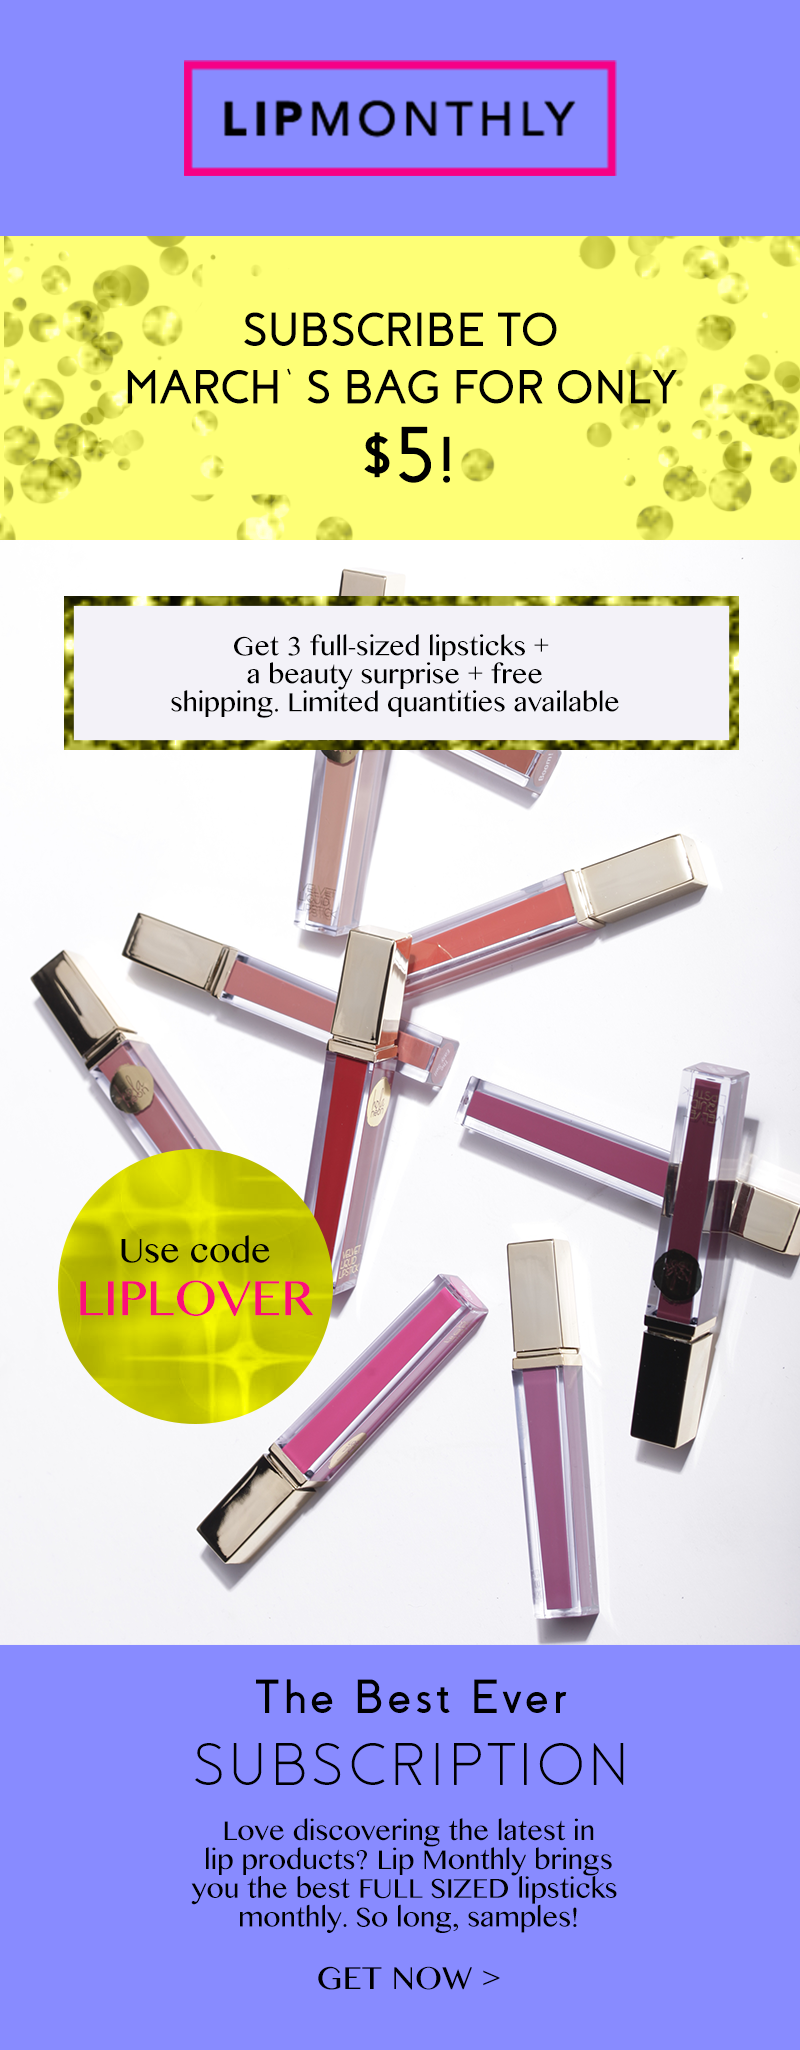 Lip Monthly: Get your first bag for just $5!